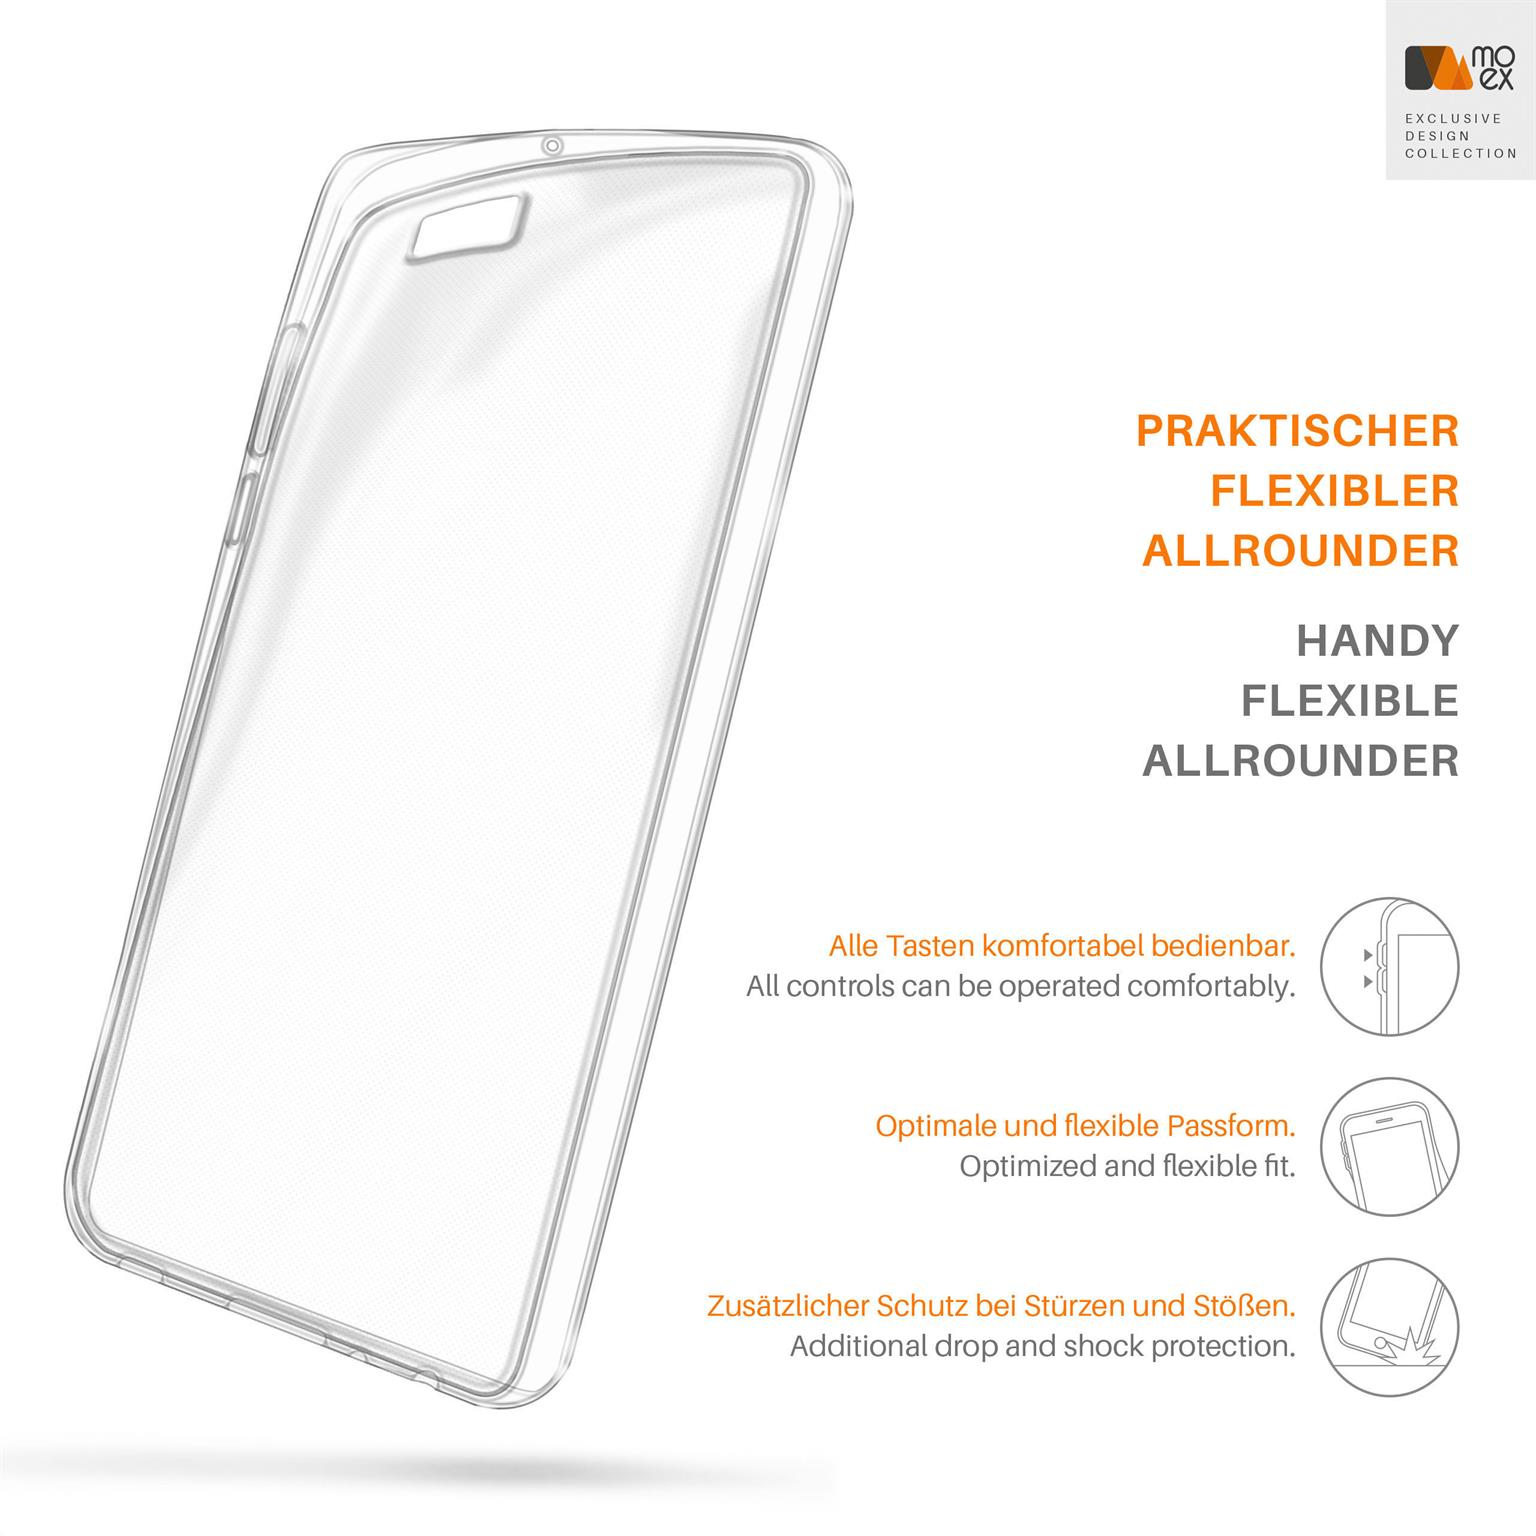 Aero Crystal-Clear Backcover, P8, Huawei, Case, MOEX